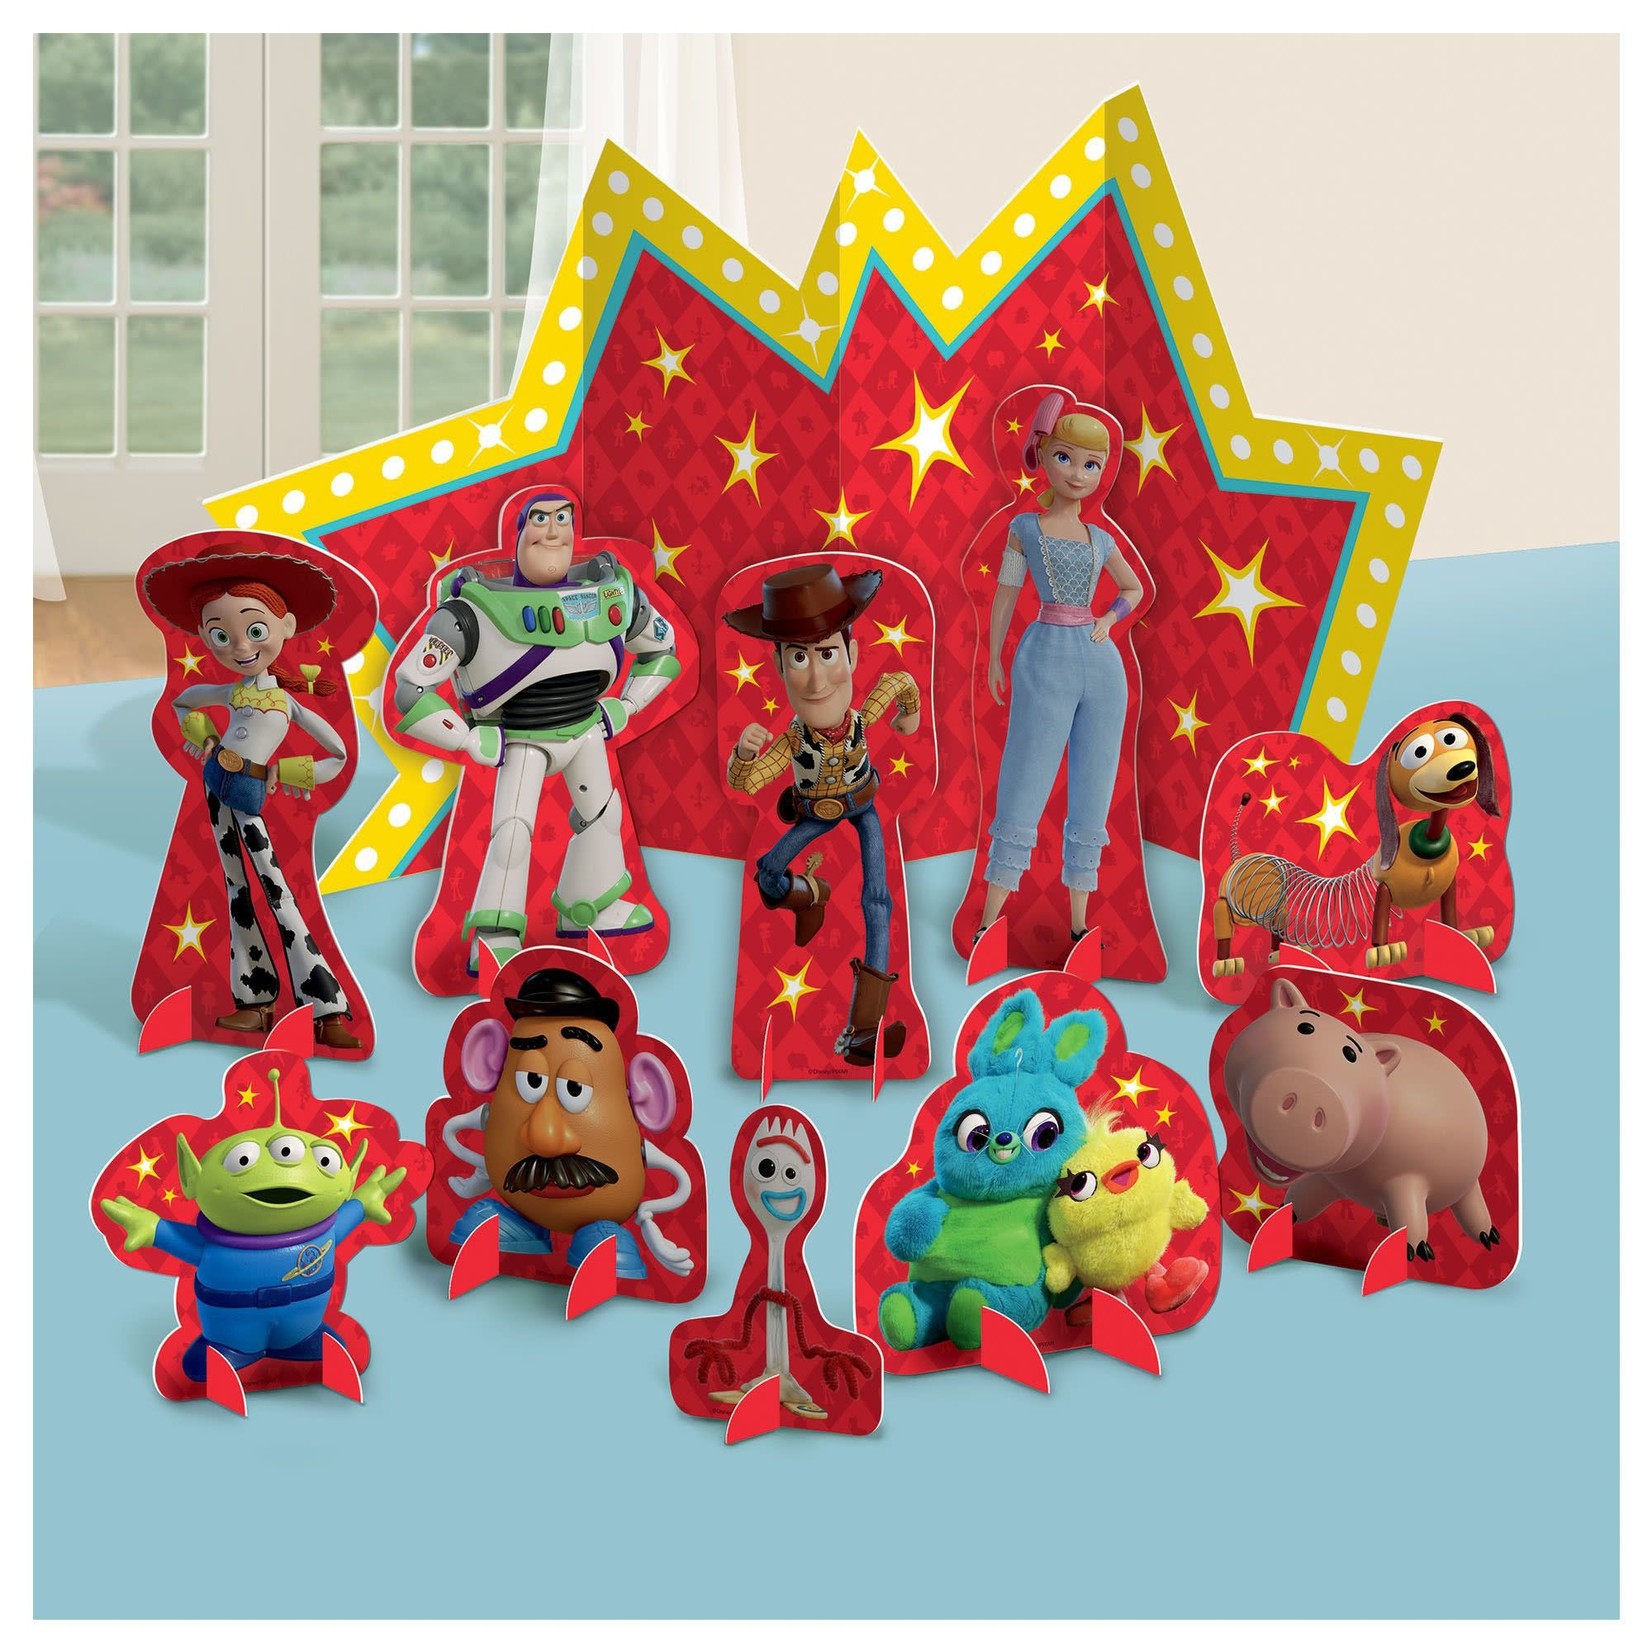 Pixar Toy Story 4 Table Decoration